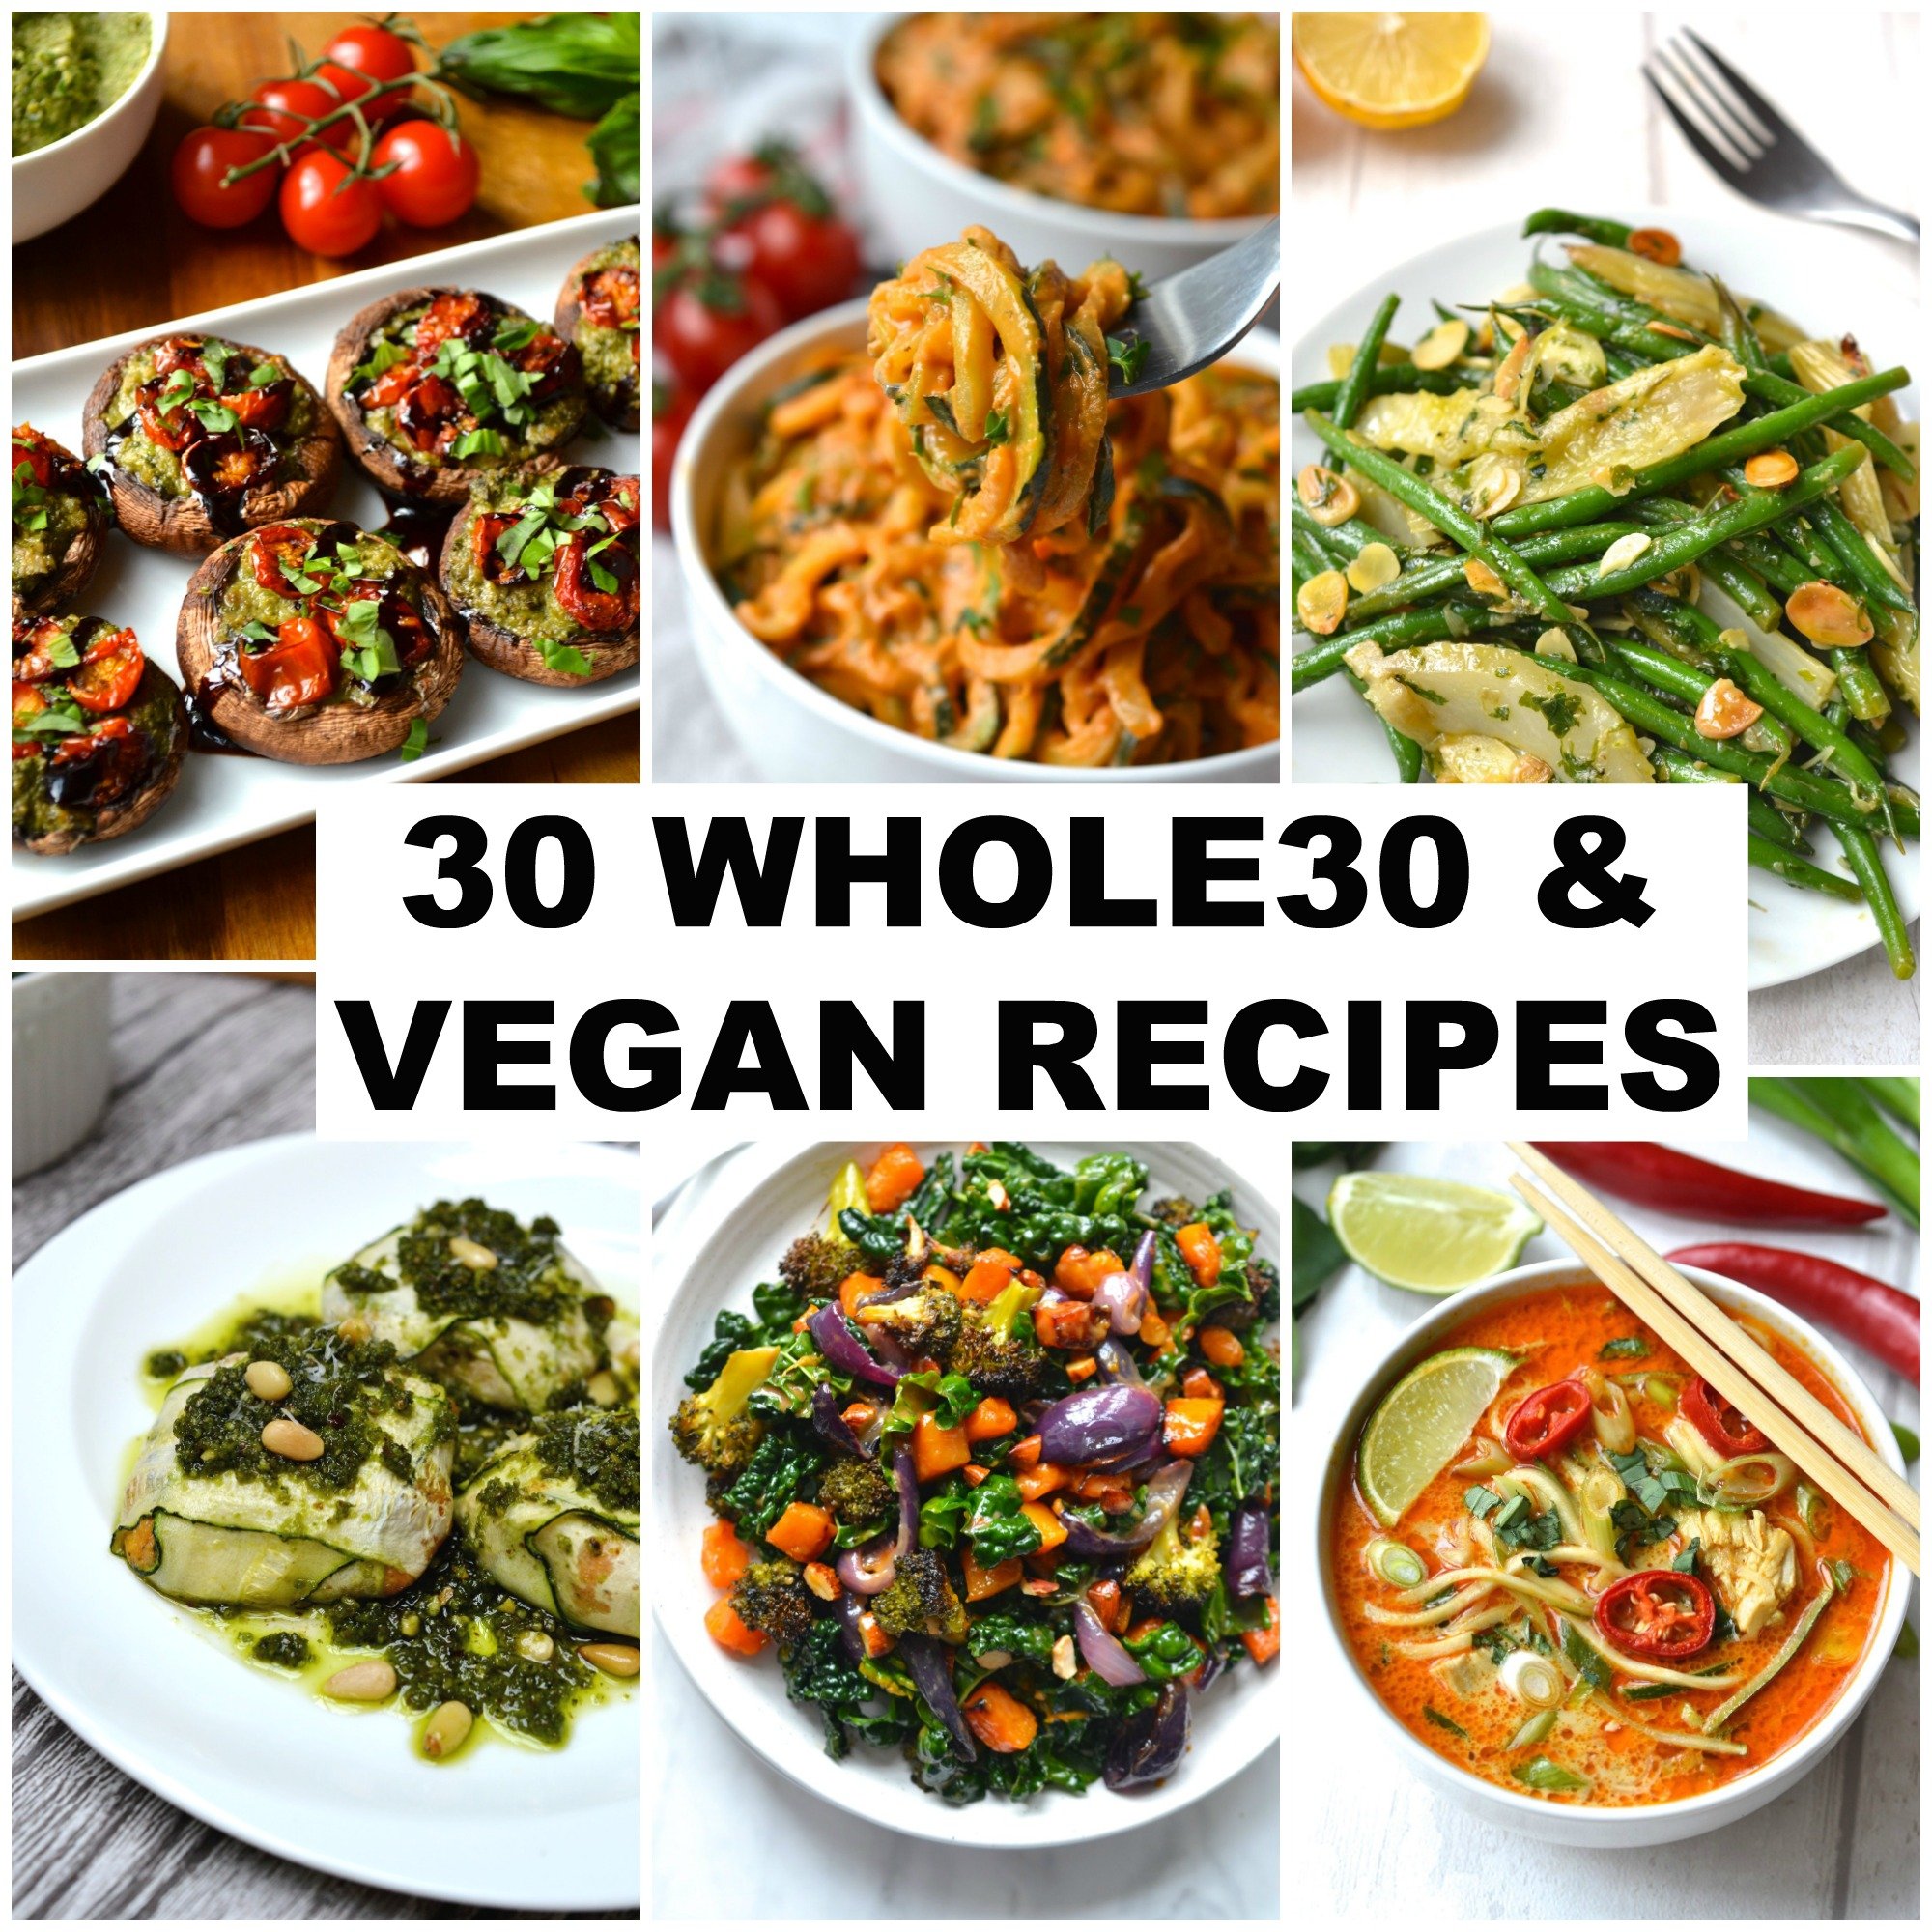 30 Whole30 Recipes That Are Also Vegan & Vegetarian | Every Last Bite